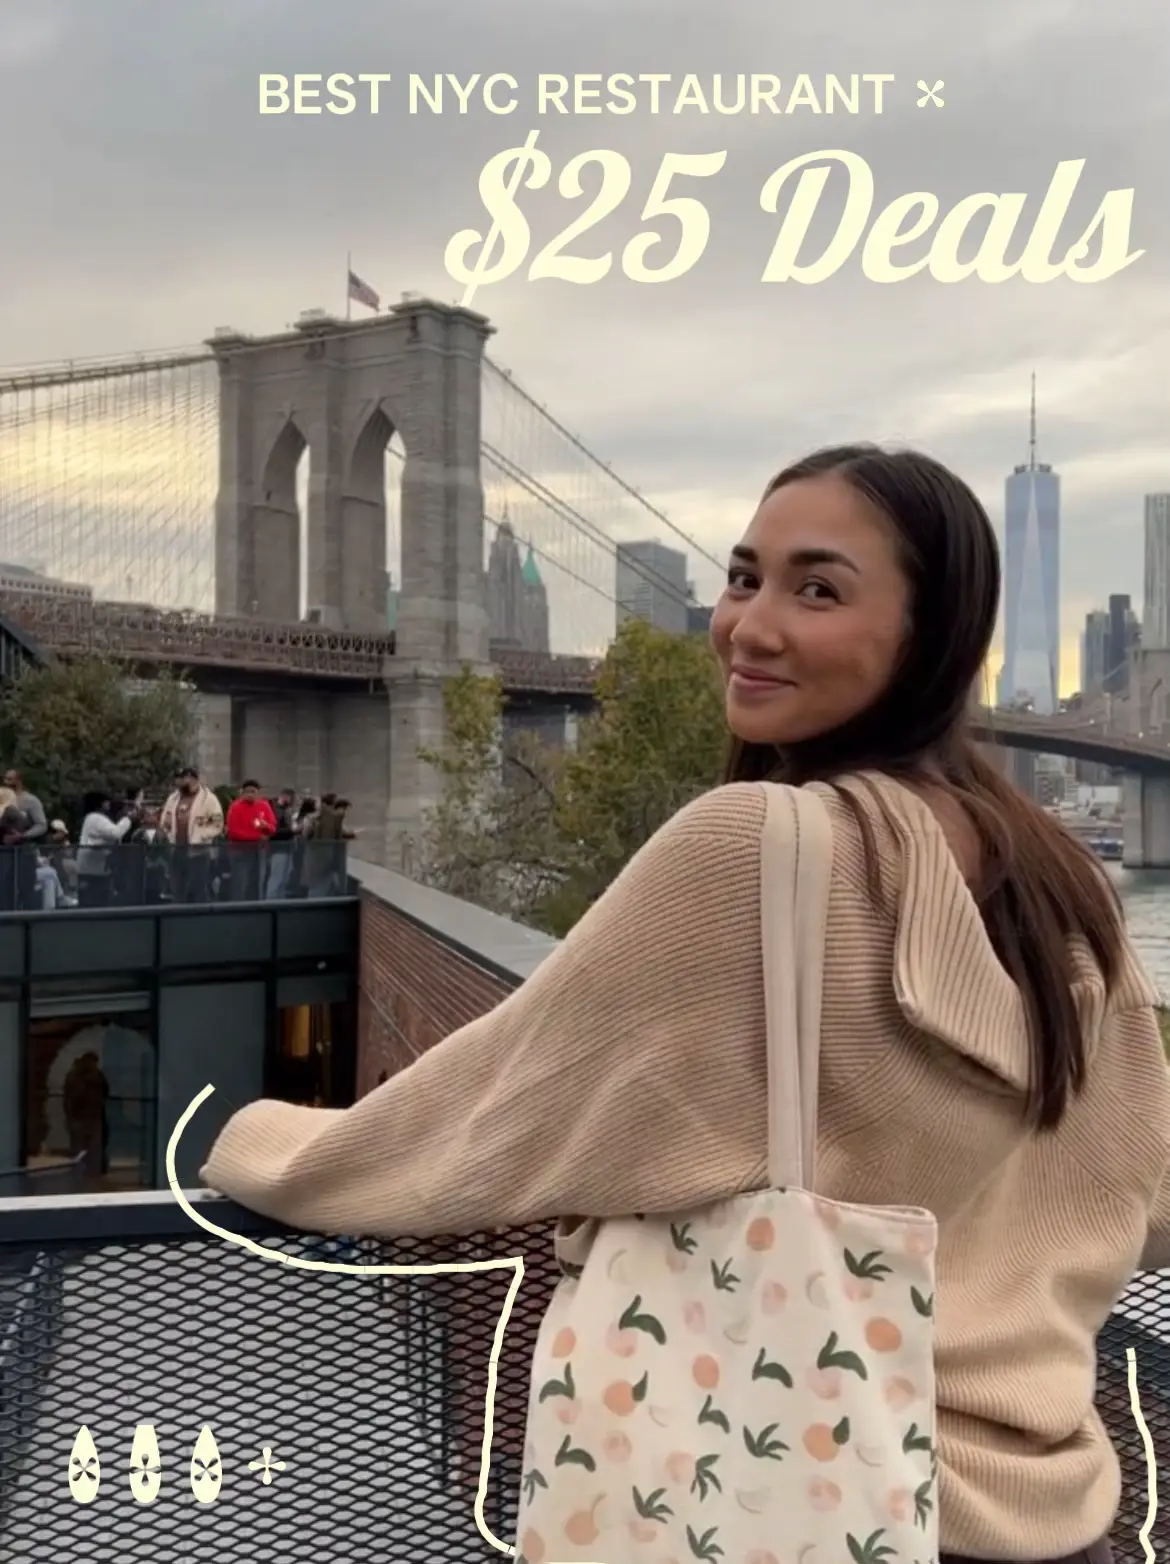  A woman is standing on a balcony of a building with a bridge in the background. She is wearing a brown sweater and a brown purse. The building has a sign that says "best ny